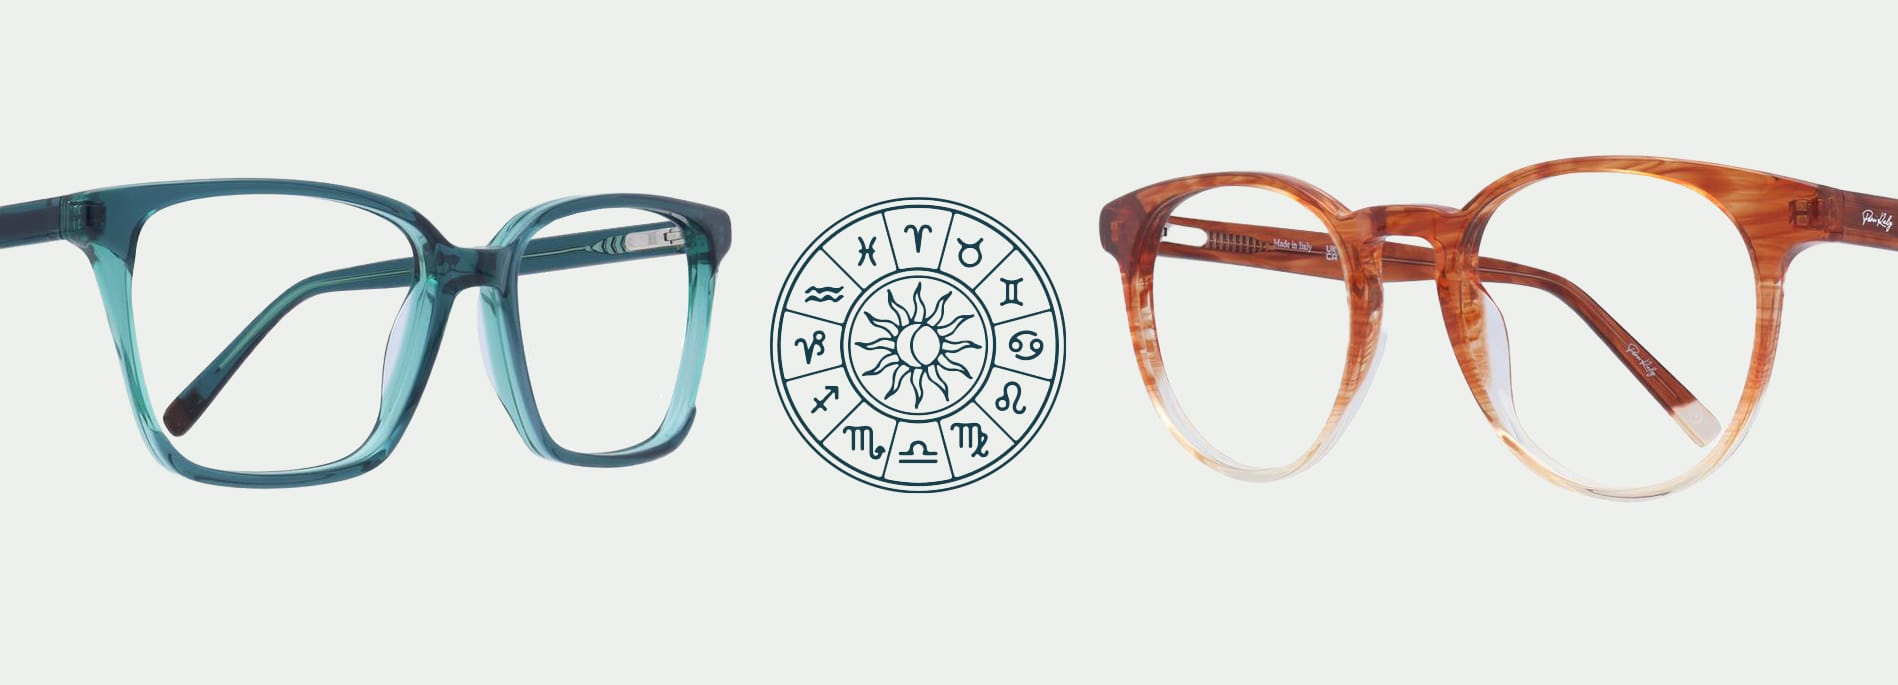 2 pairs of frames coming from both side facing a zodiac symbol